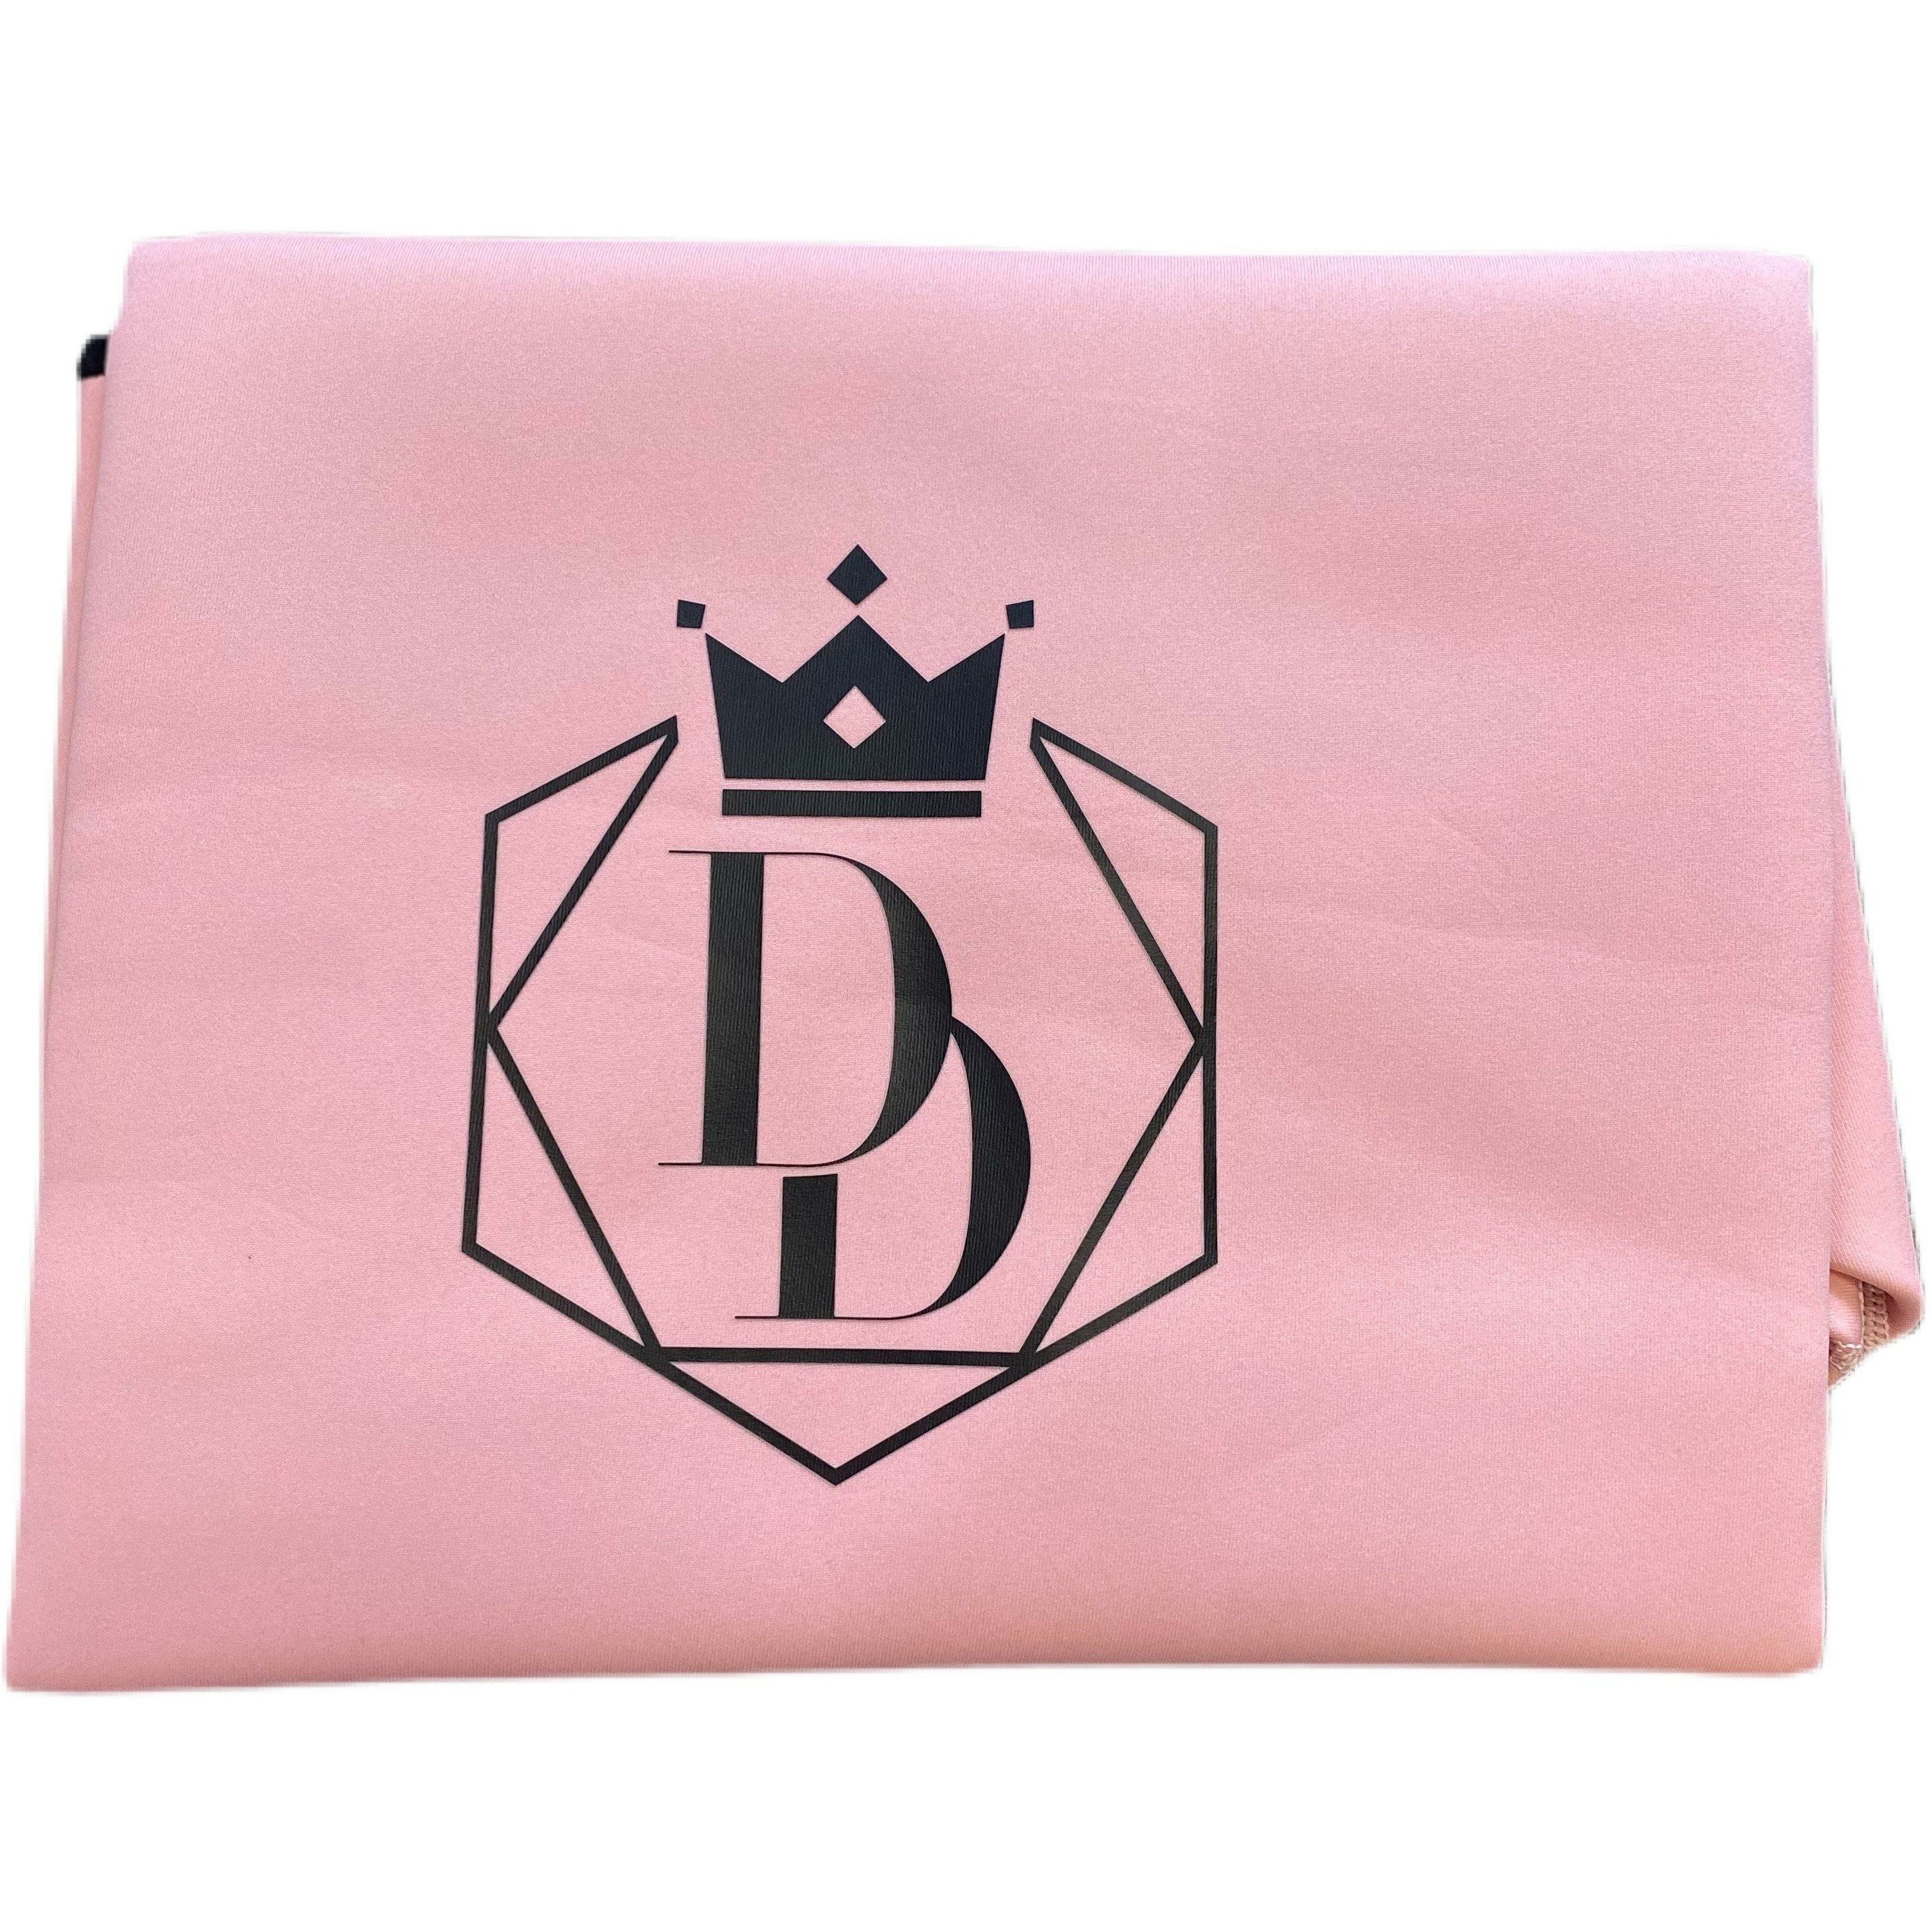 DivaDolly Petite Slipcover - DivaDolly